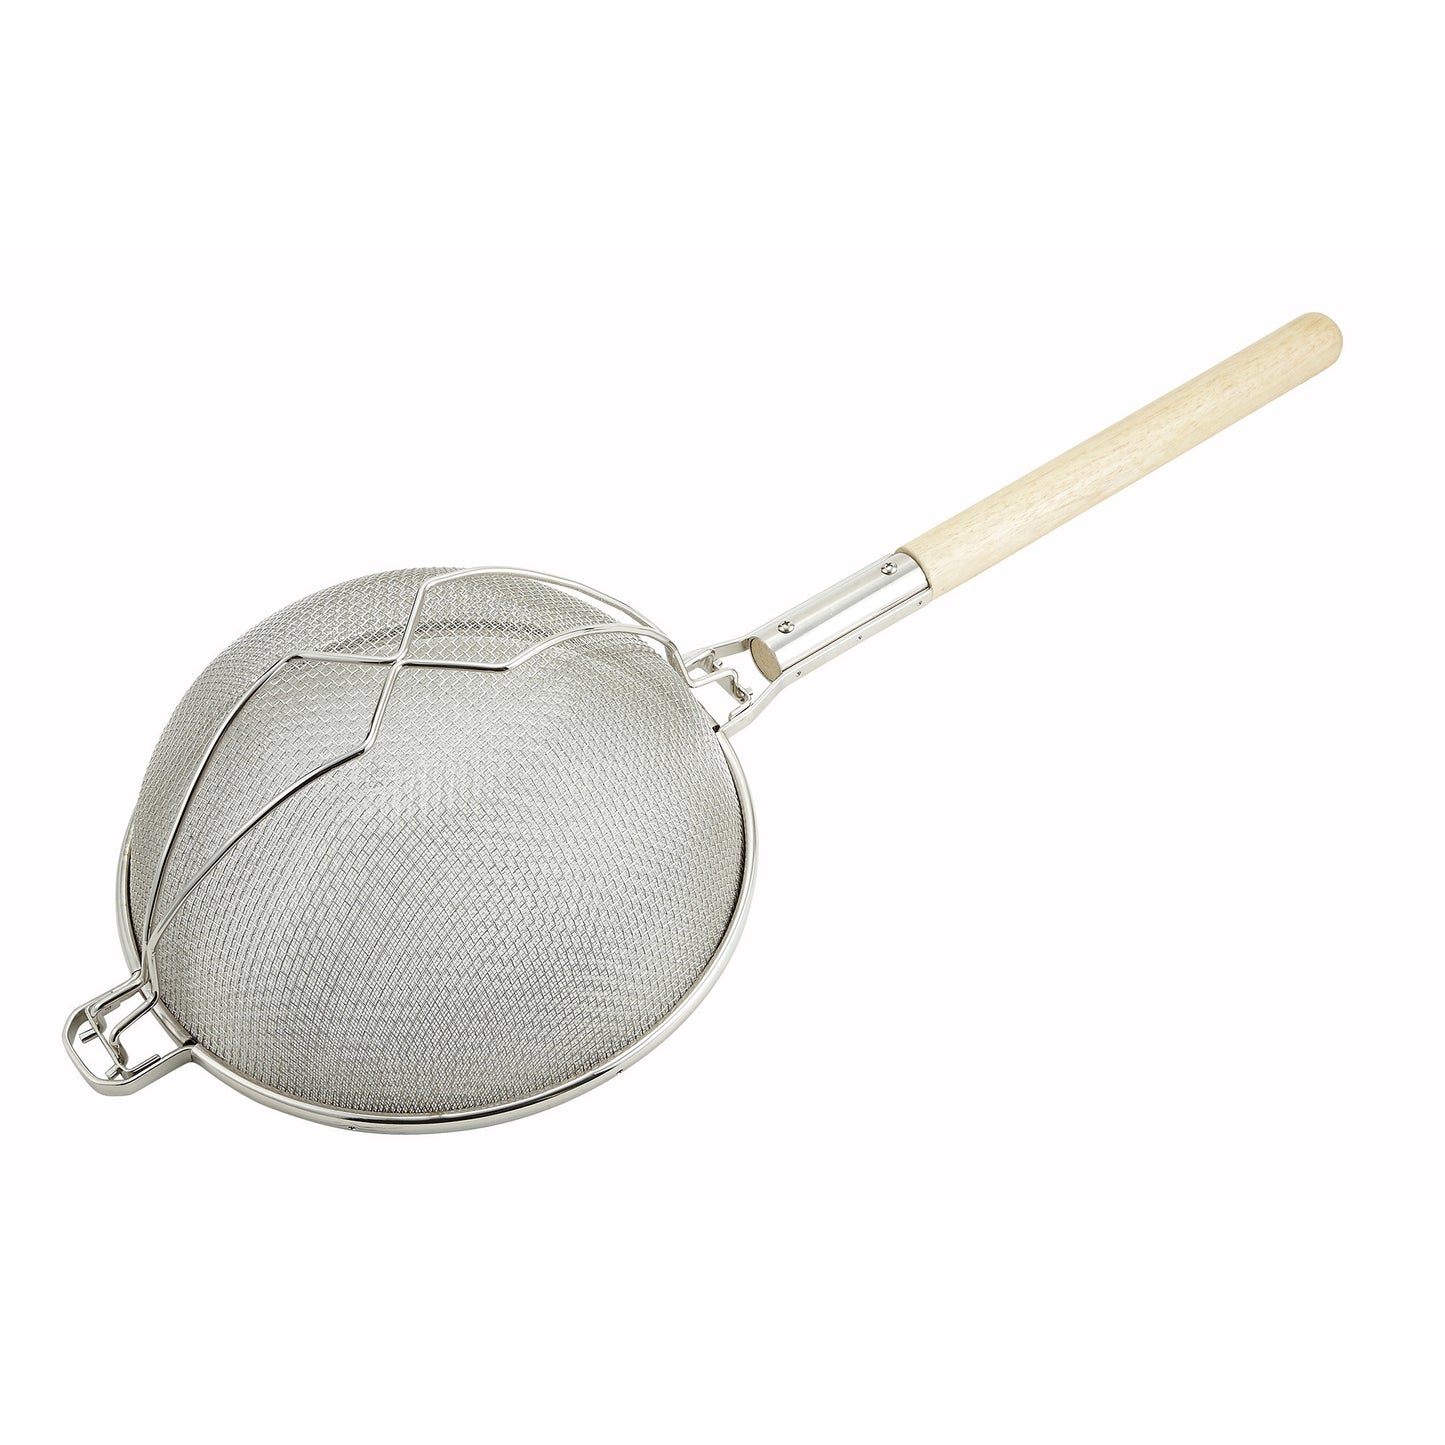 MST-12D - 12" Reinforced Double Mesh Strainer with Round Handle